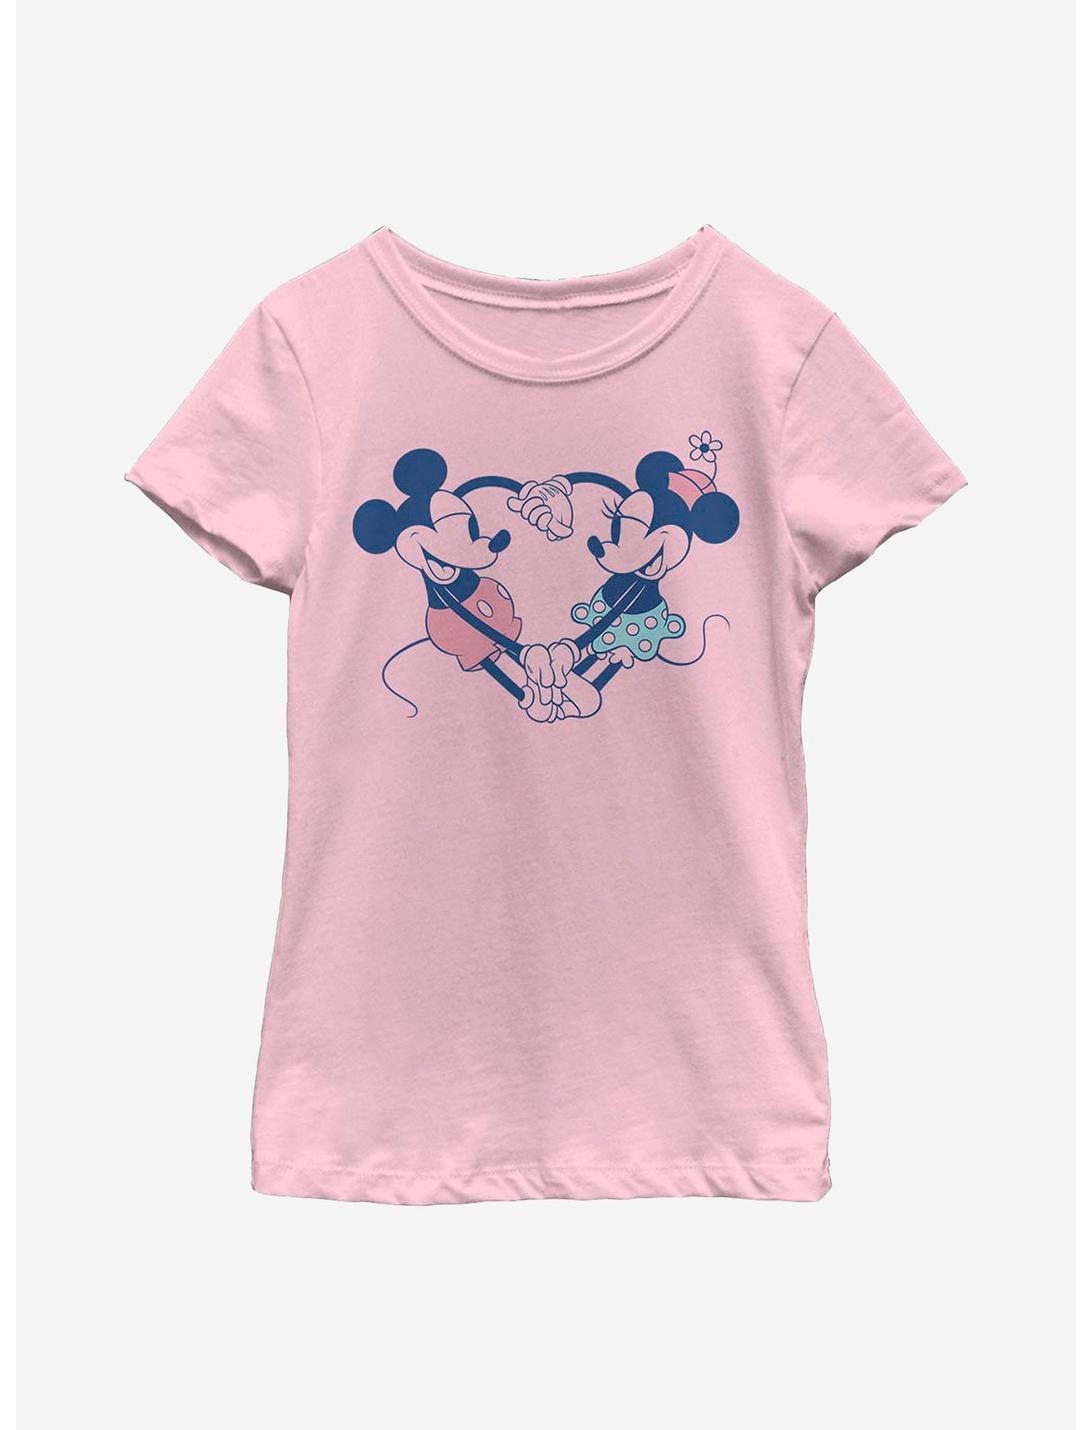 Disney Mickey Mouse Heart Pair Youth Girls T-Shirt, PINK, hi-res